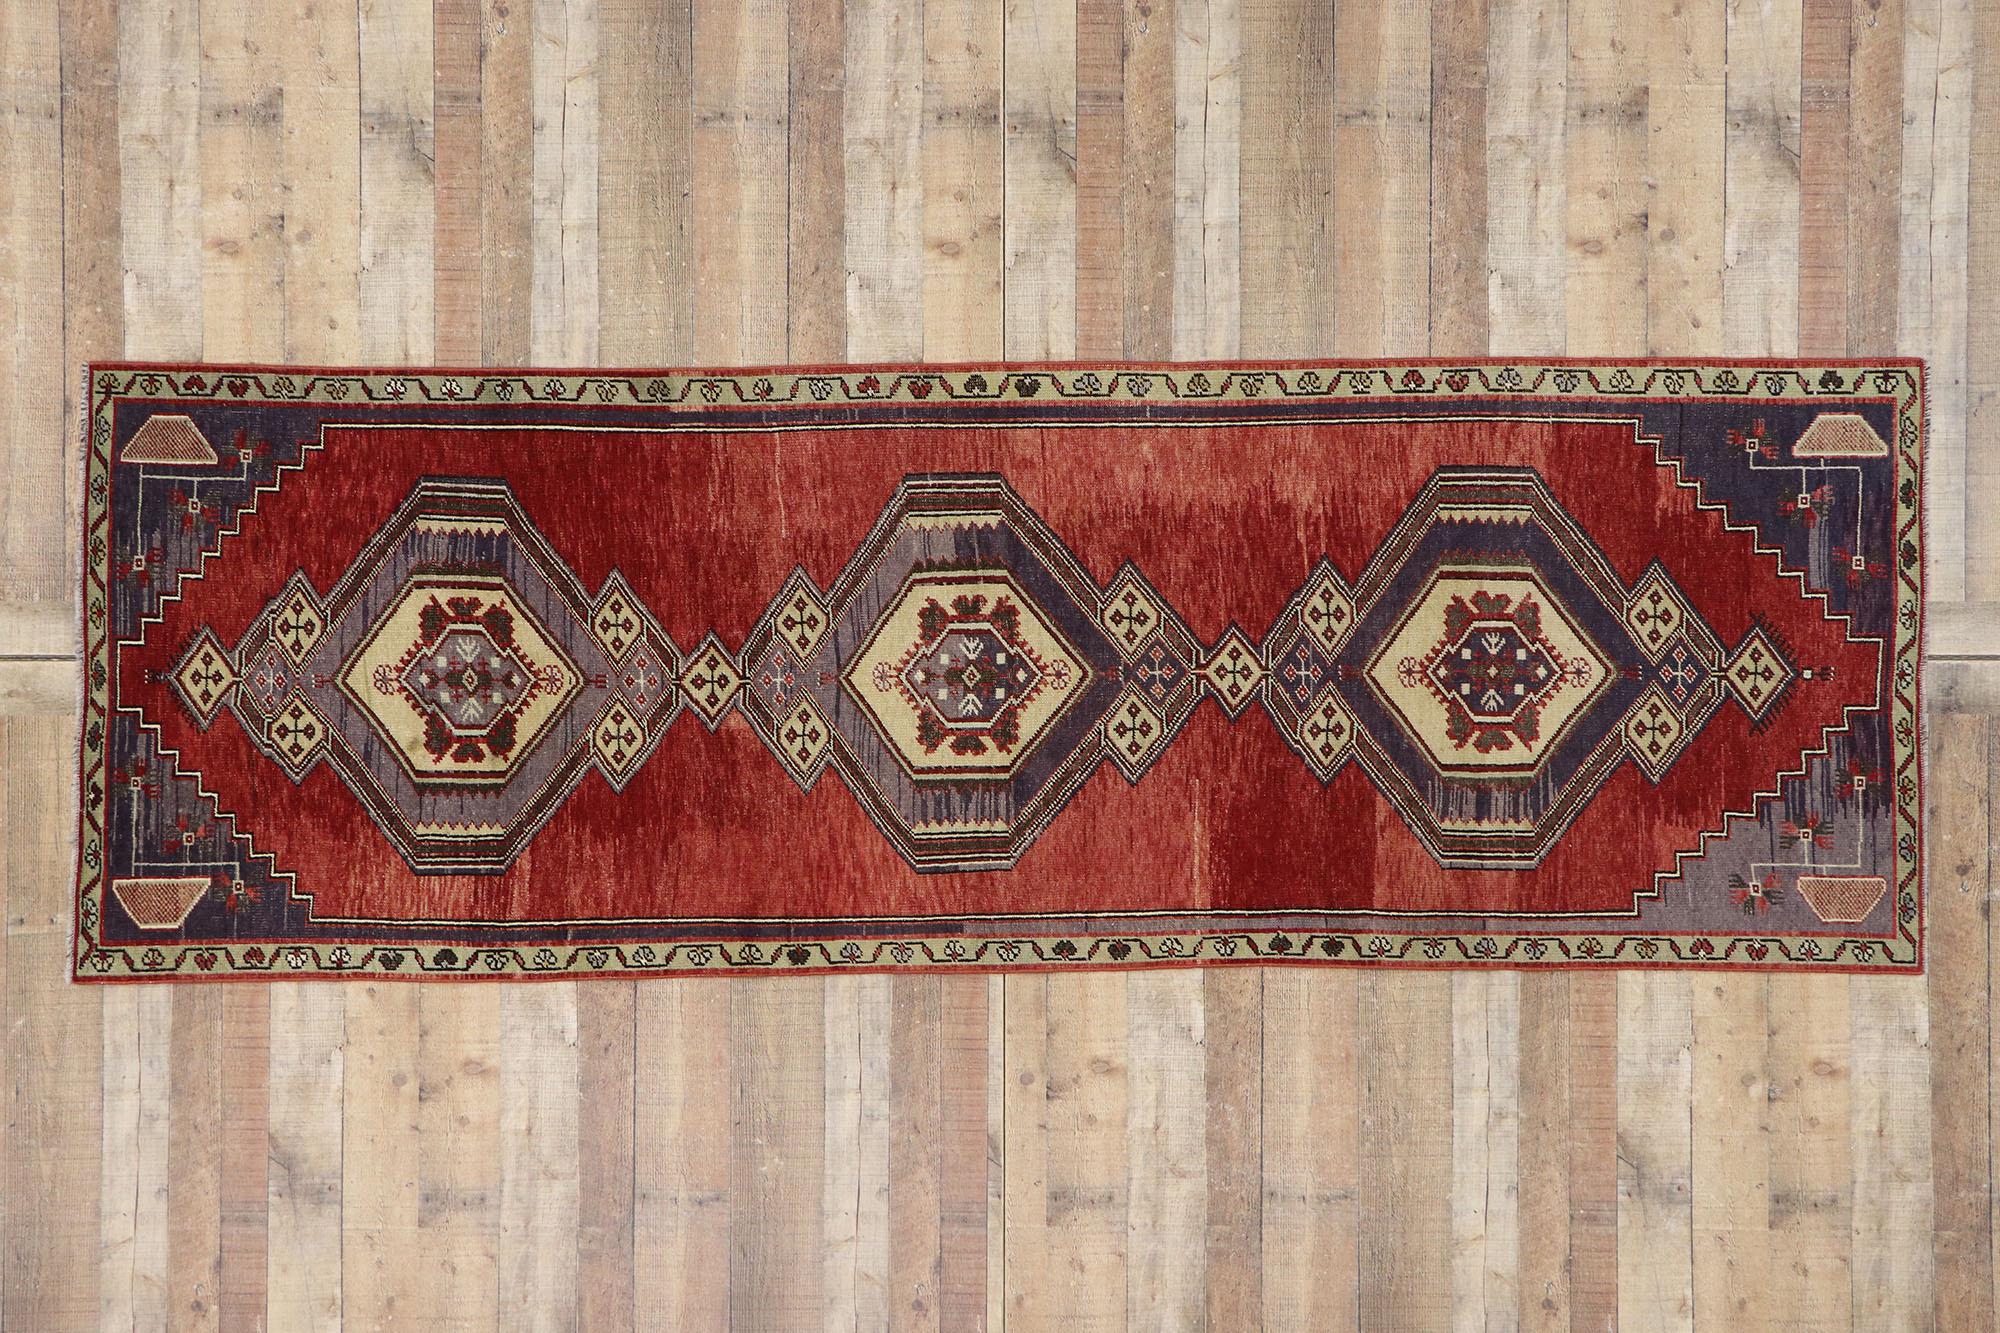 Vintage Turkish Oushak Runner with Mid-Century Modern Style For Sale 2